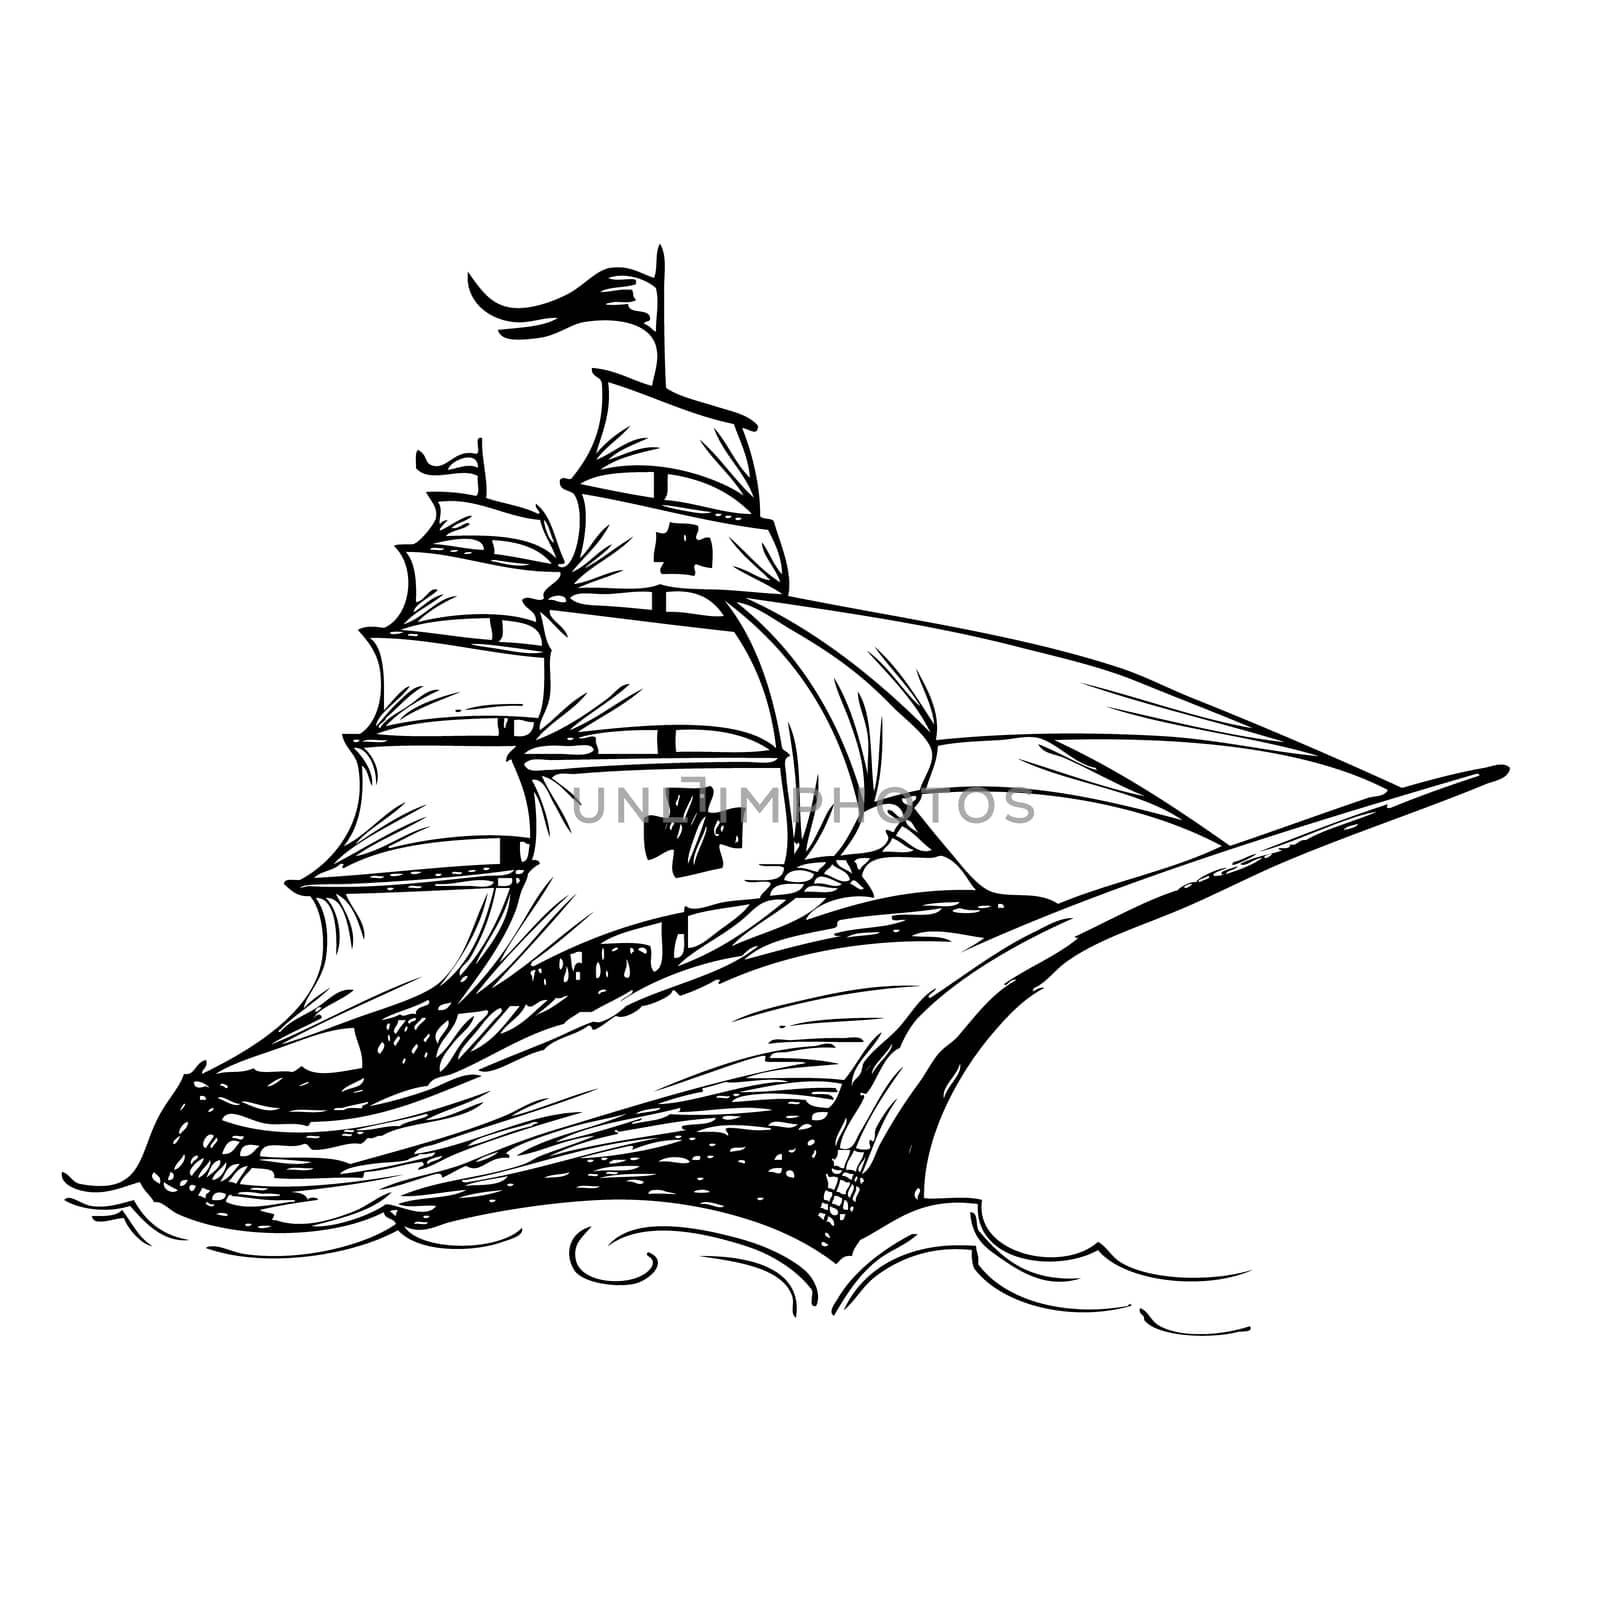 Columbus ship hand drawn by pencil made for Columbus day